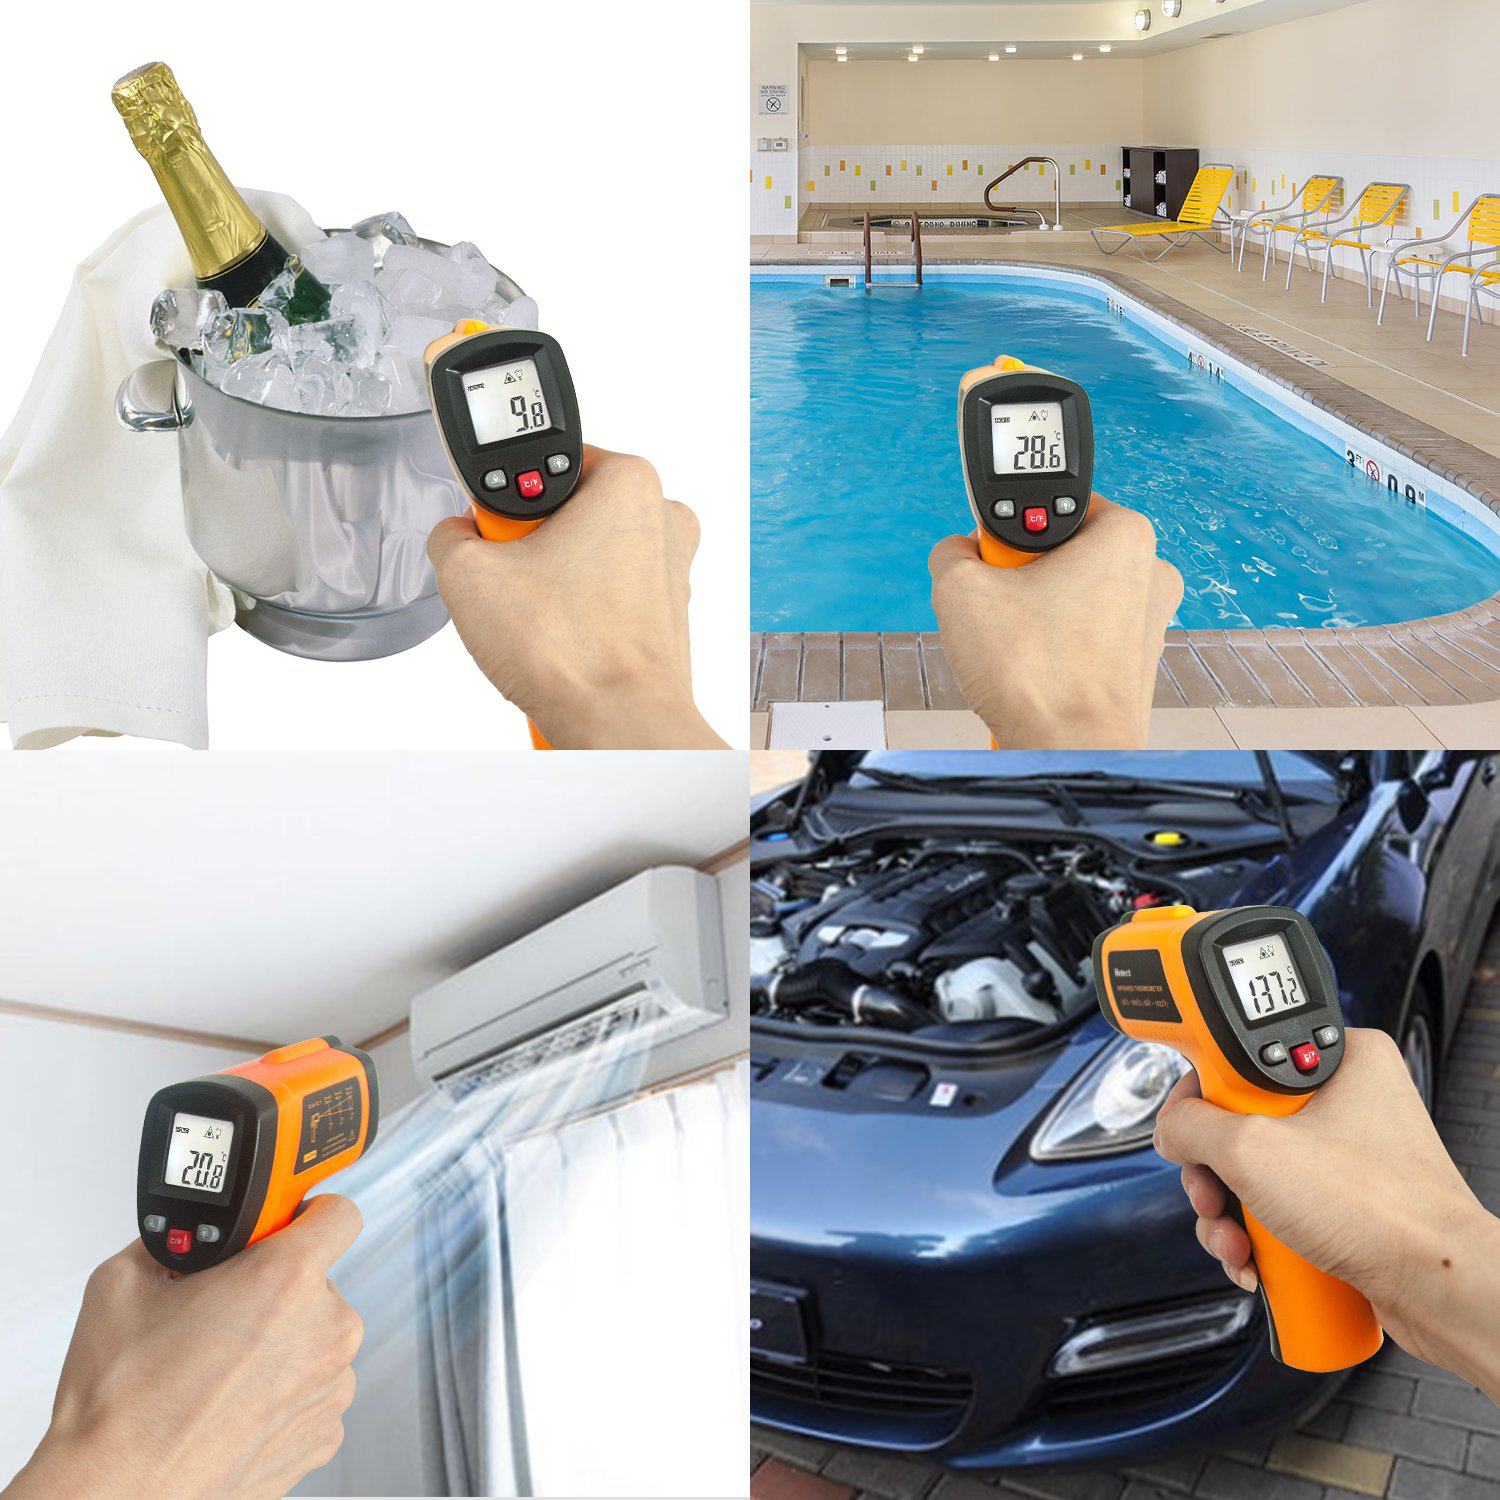 Helect (NOT for Human) Infrared Thermometer, Non-Contact Digital Laser Temperature Gun -58°F to 1022°F (-50°C to 550°C) with LCD Display